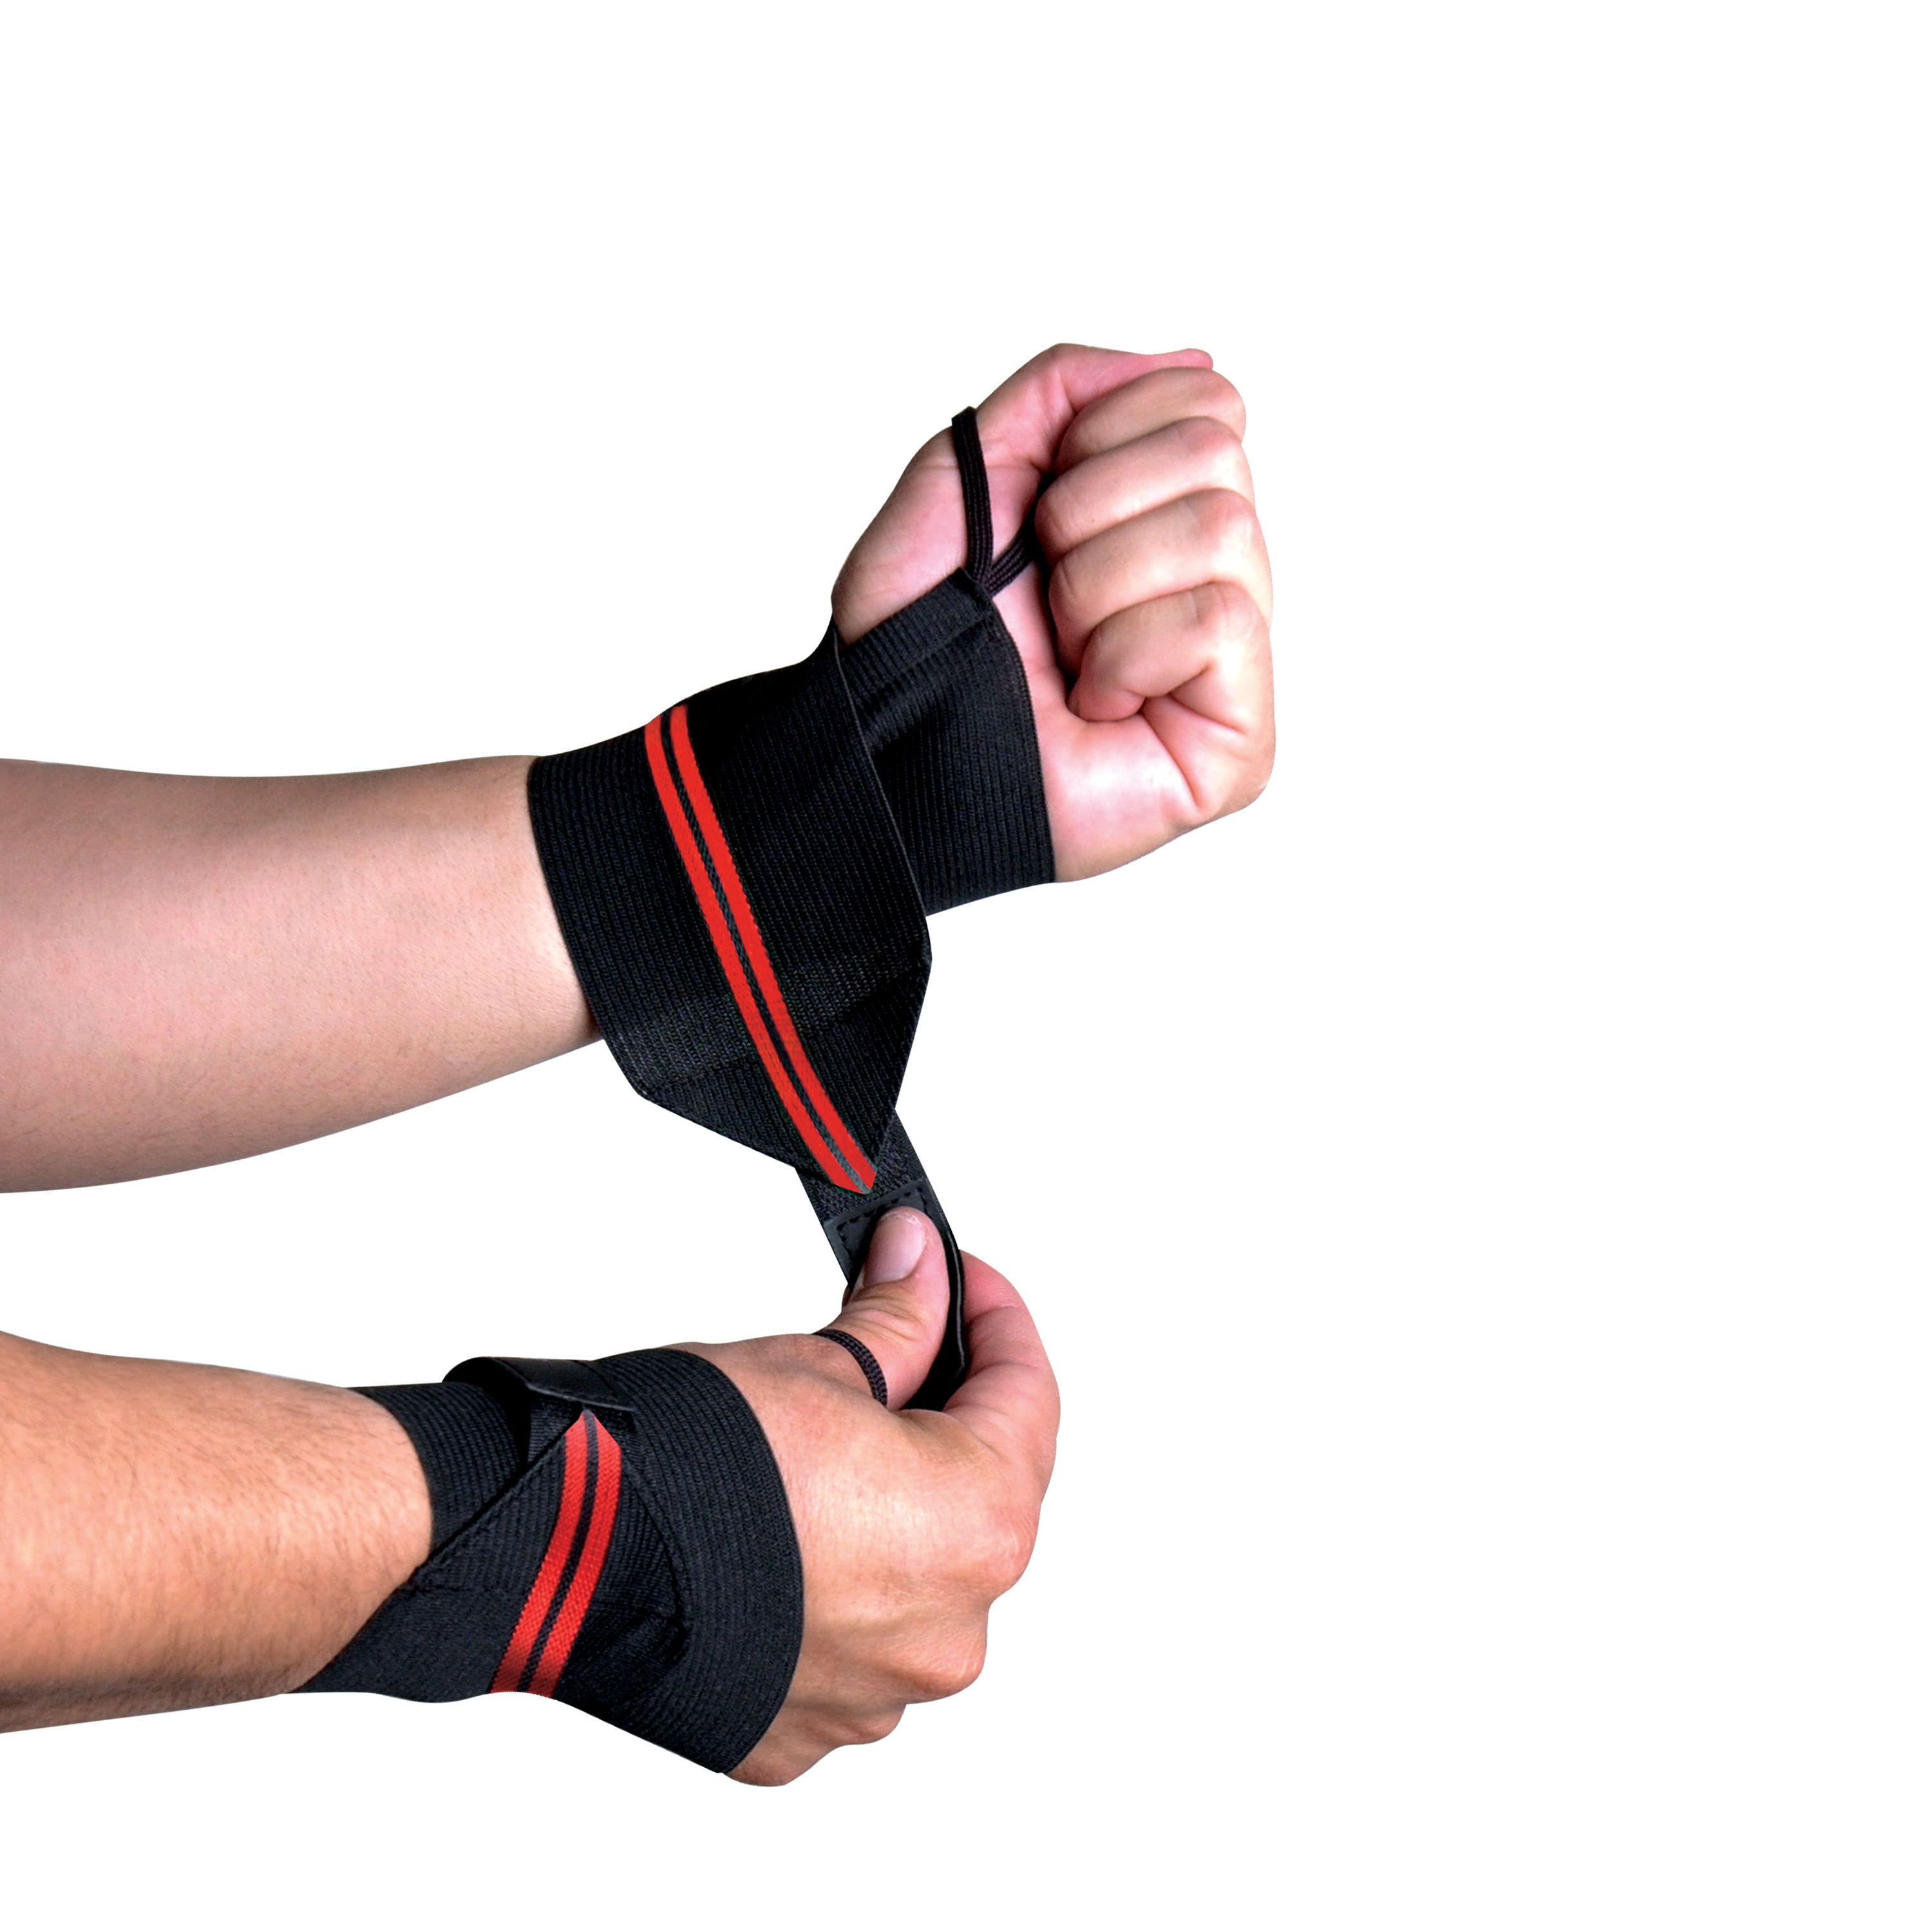 Gym Weight Lifting Wrist Wraps Power Cotton Bandage Hand Support Straps 18" PAIR 